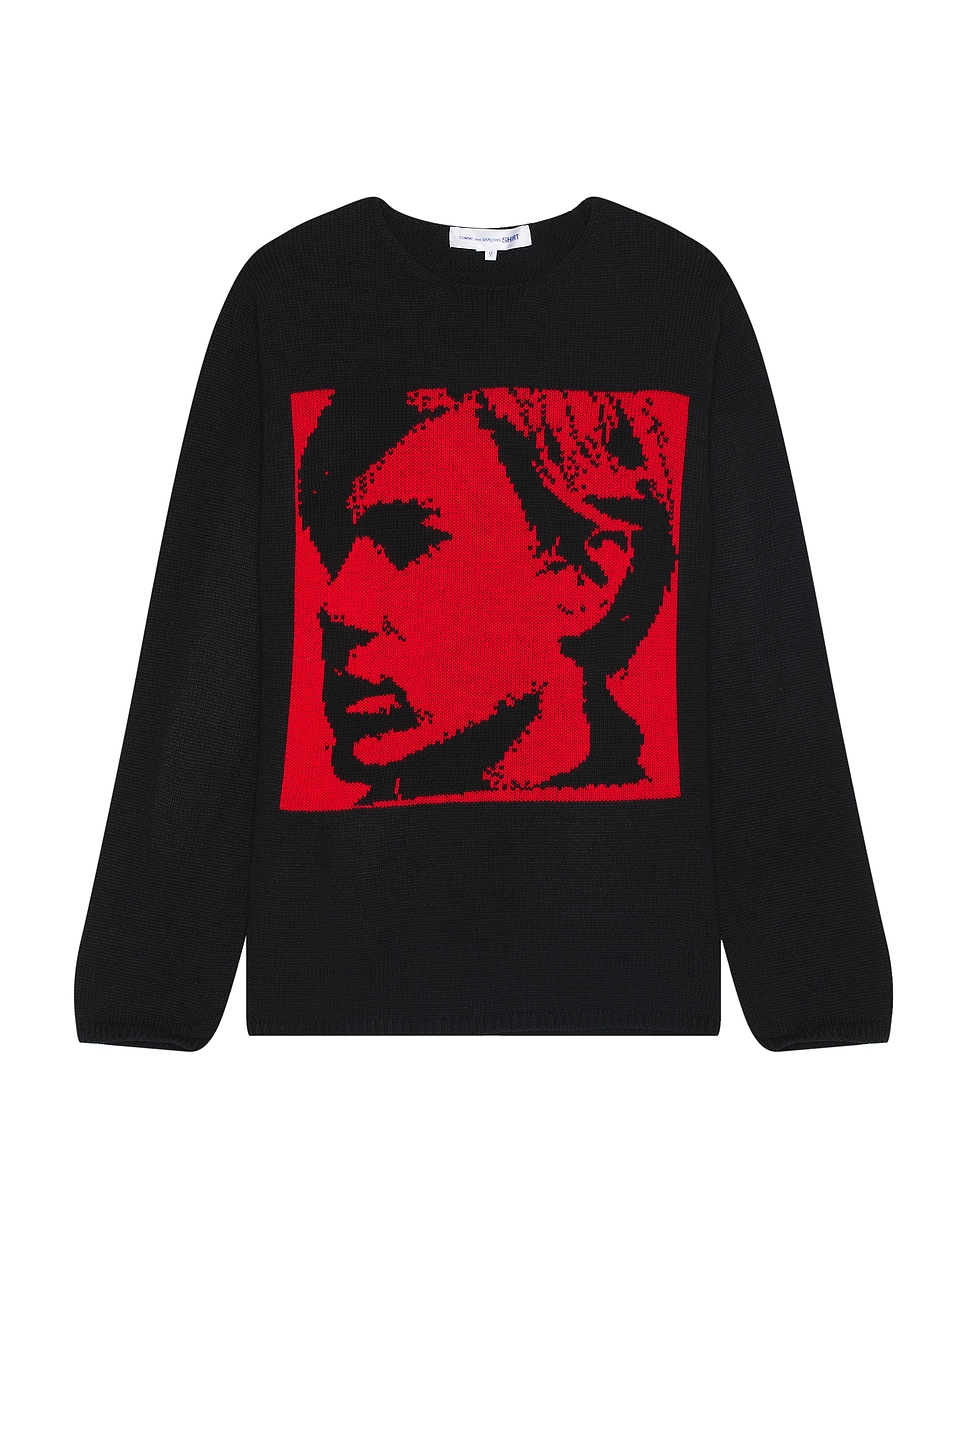 Image 1 of COMME des GARCONS SHIRT x Andy Warhol Jumper in Red